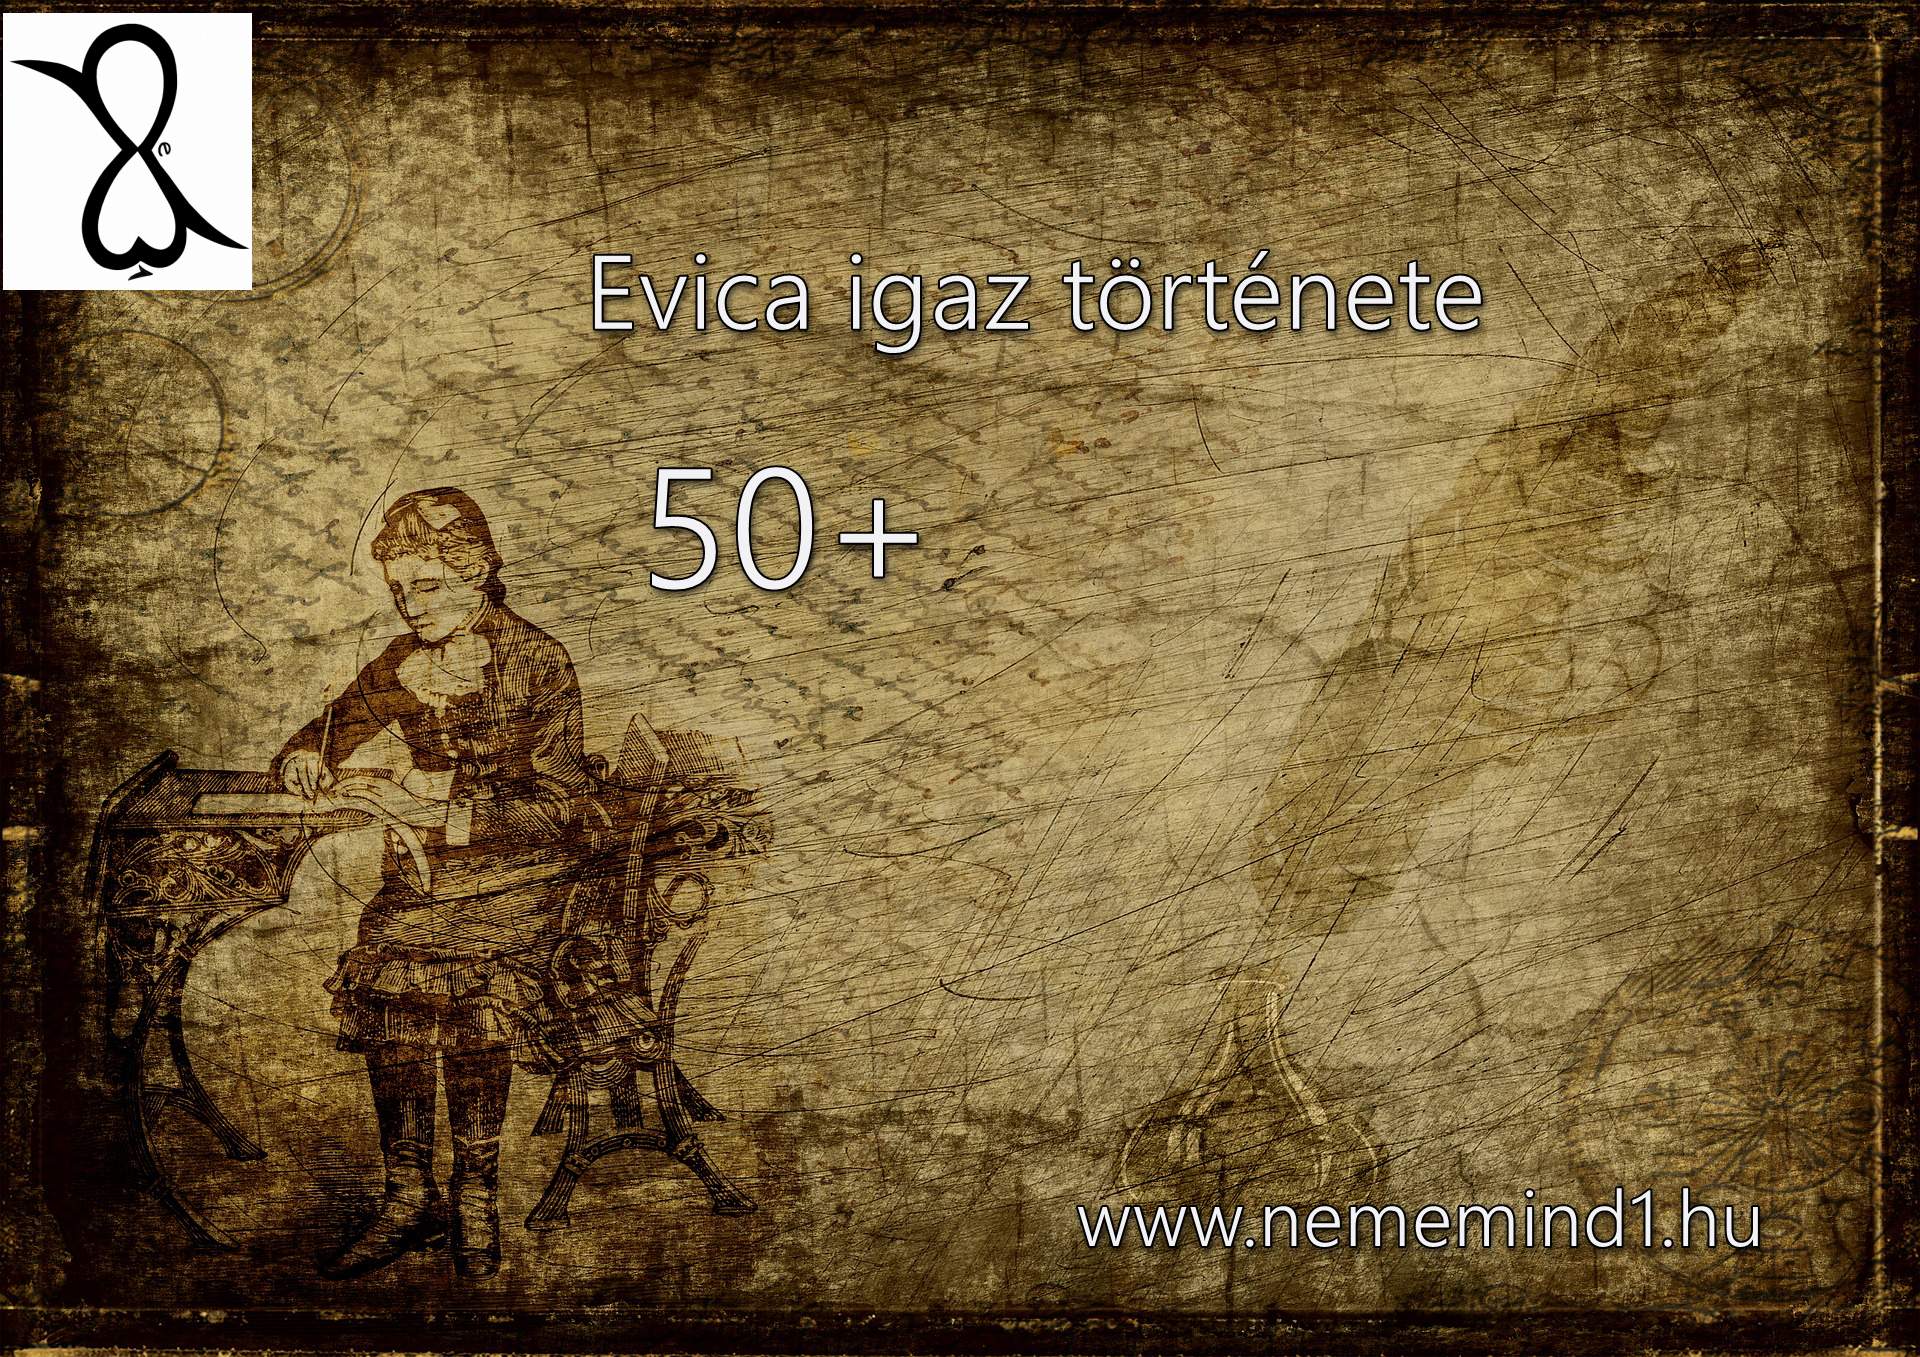 You are currently viewing 50+ (Evica igaz története)